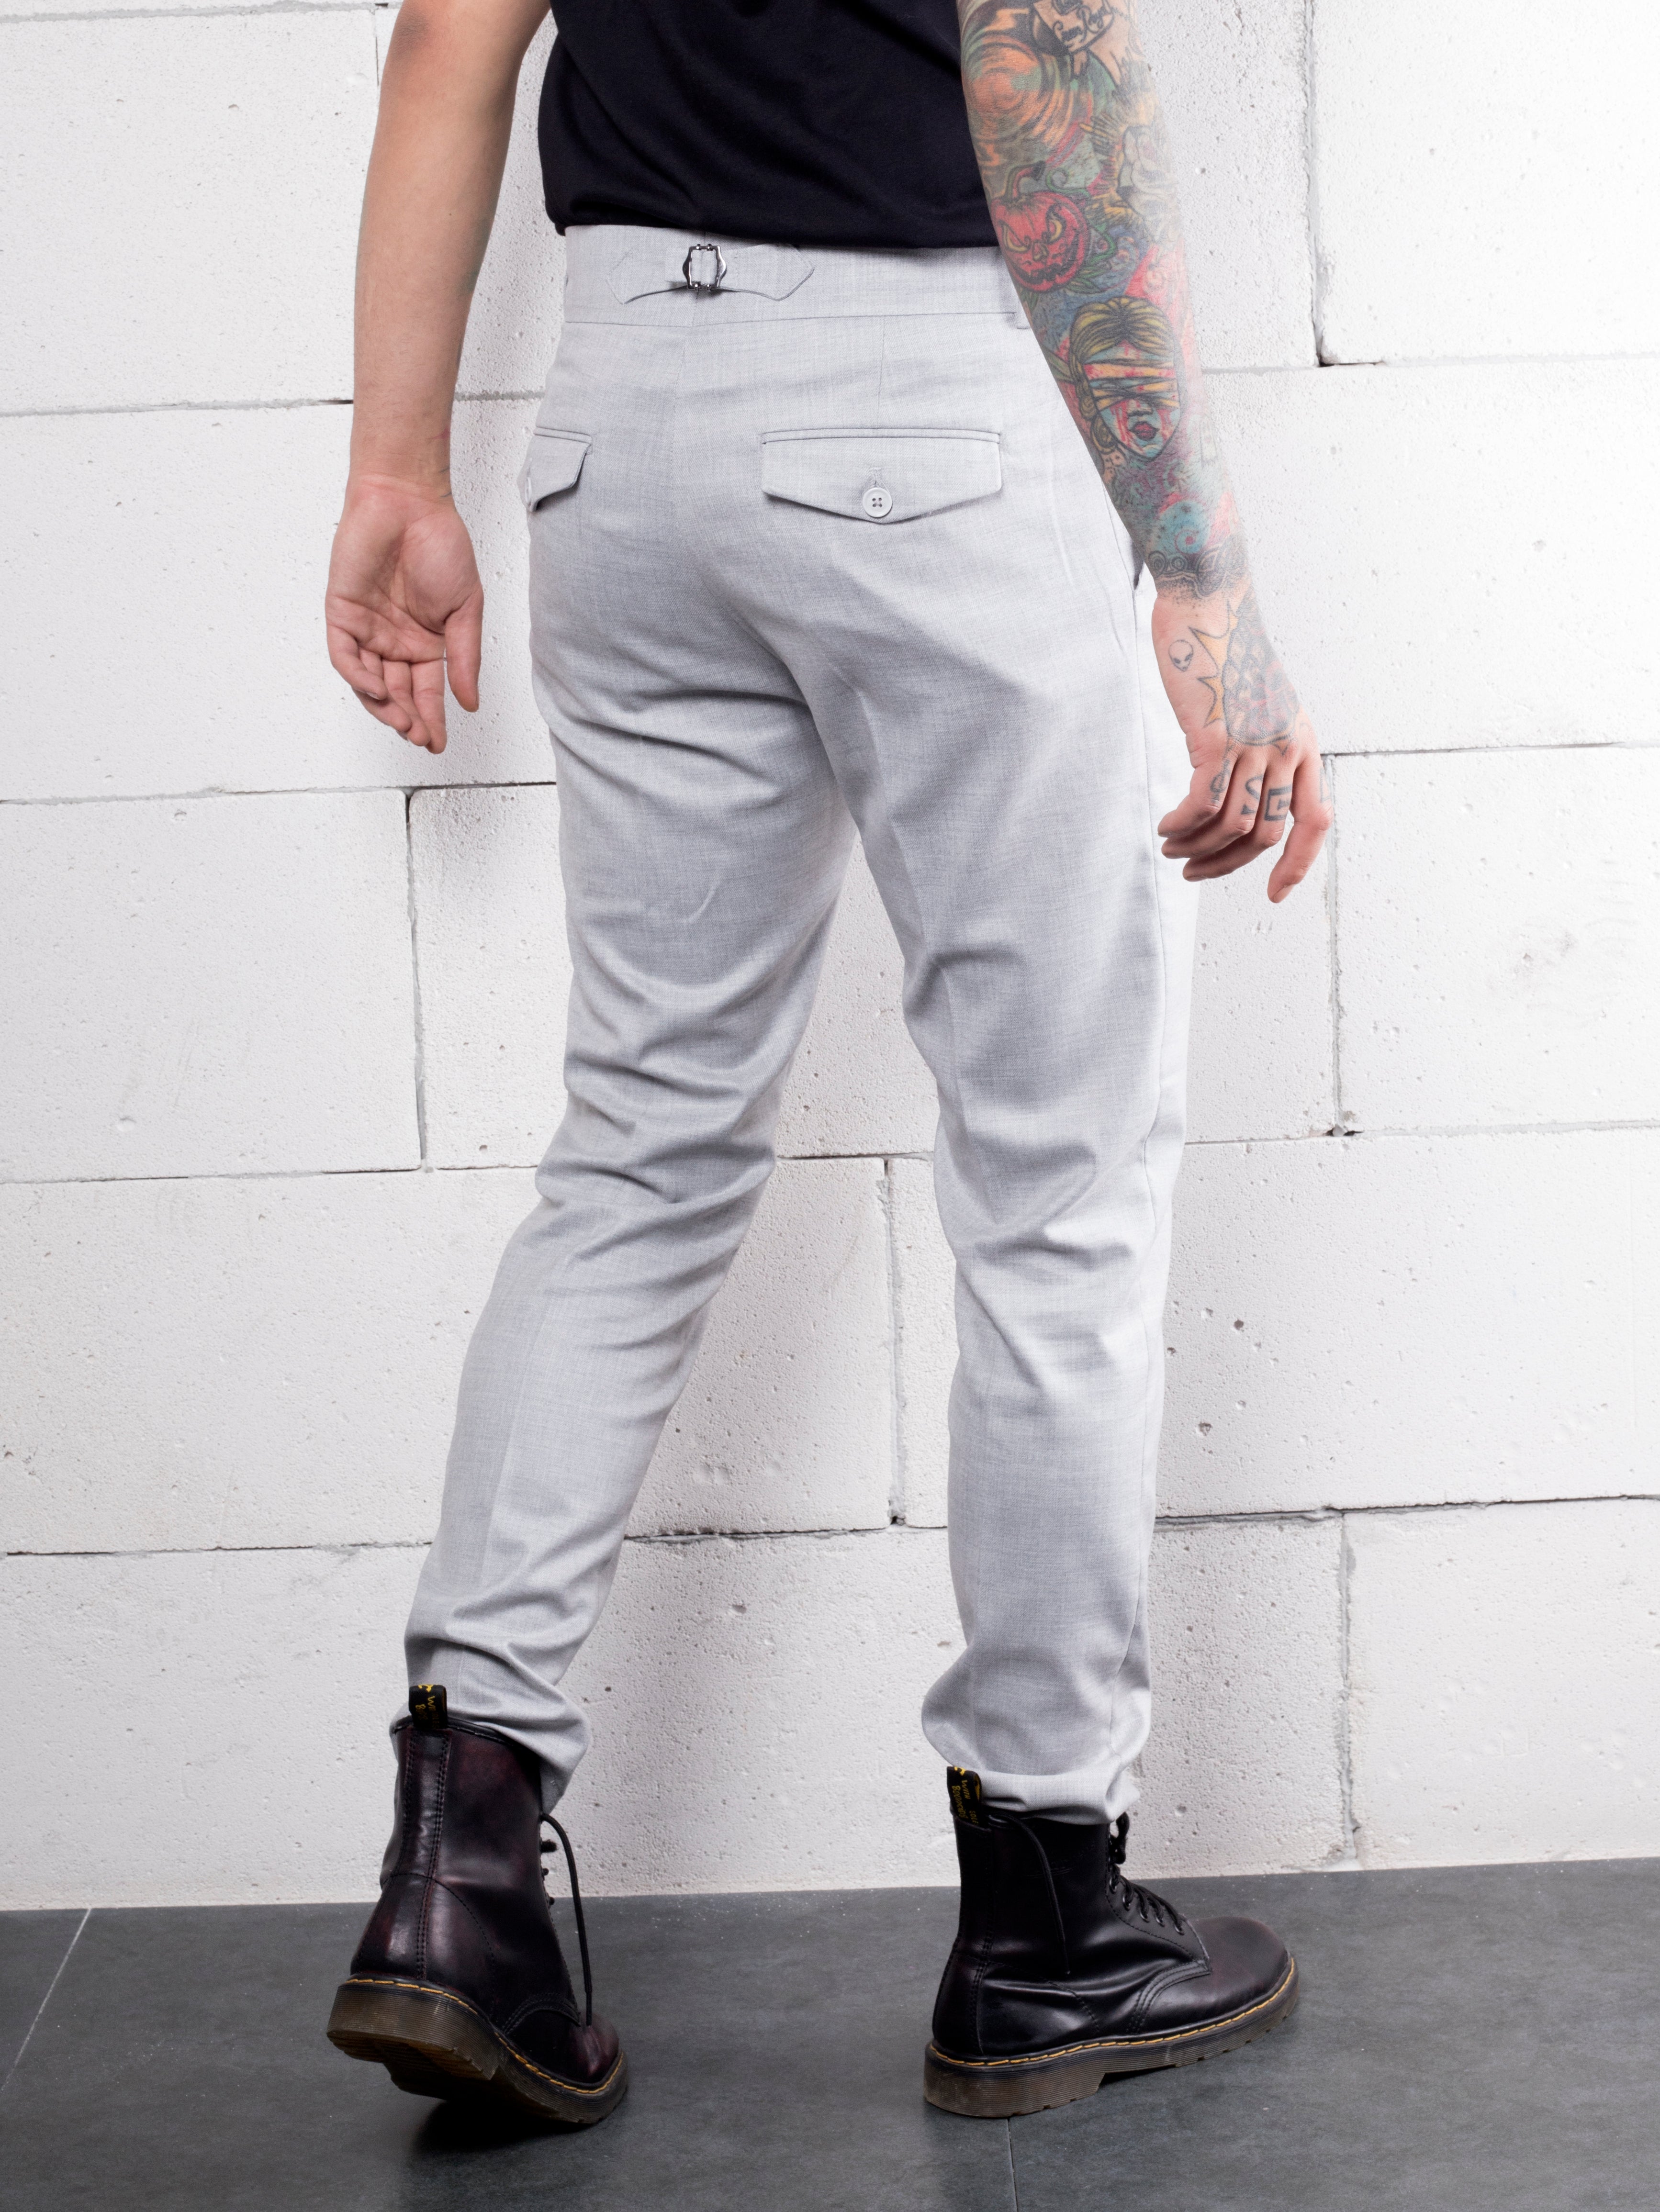 A man with tattoos wearing slim-fit grey Granite pants made from premium Italian fabric.